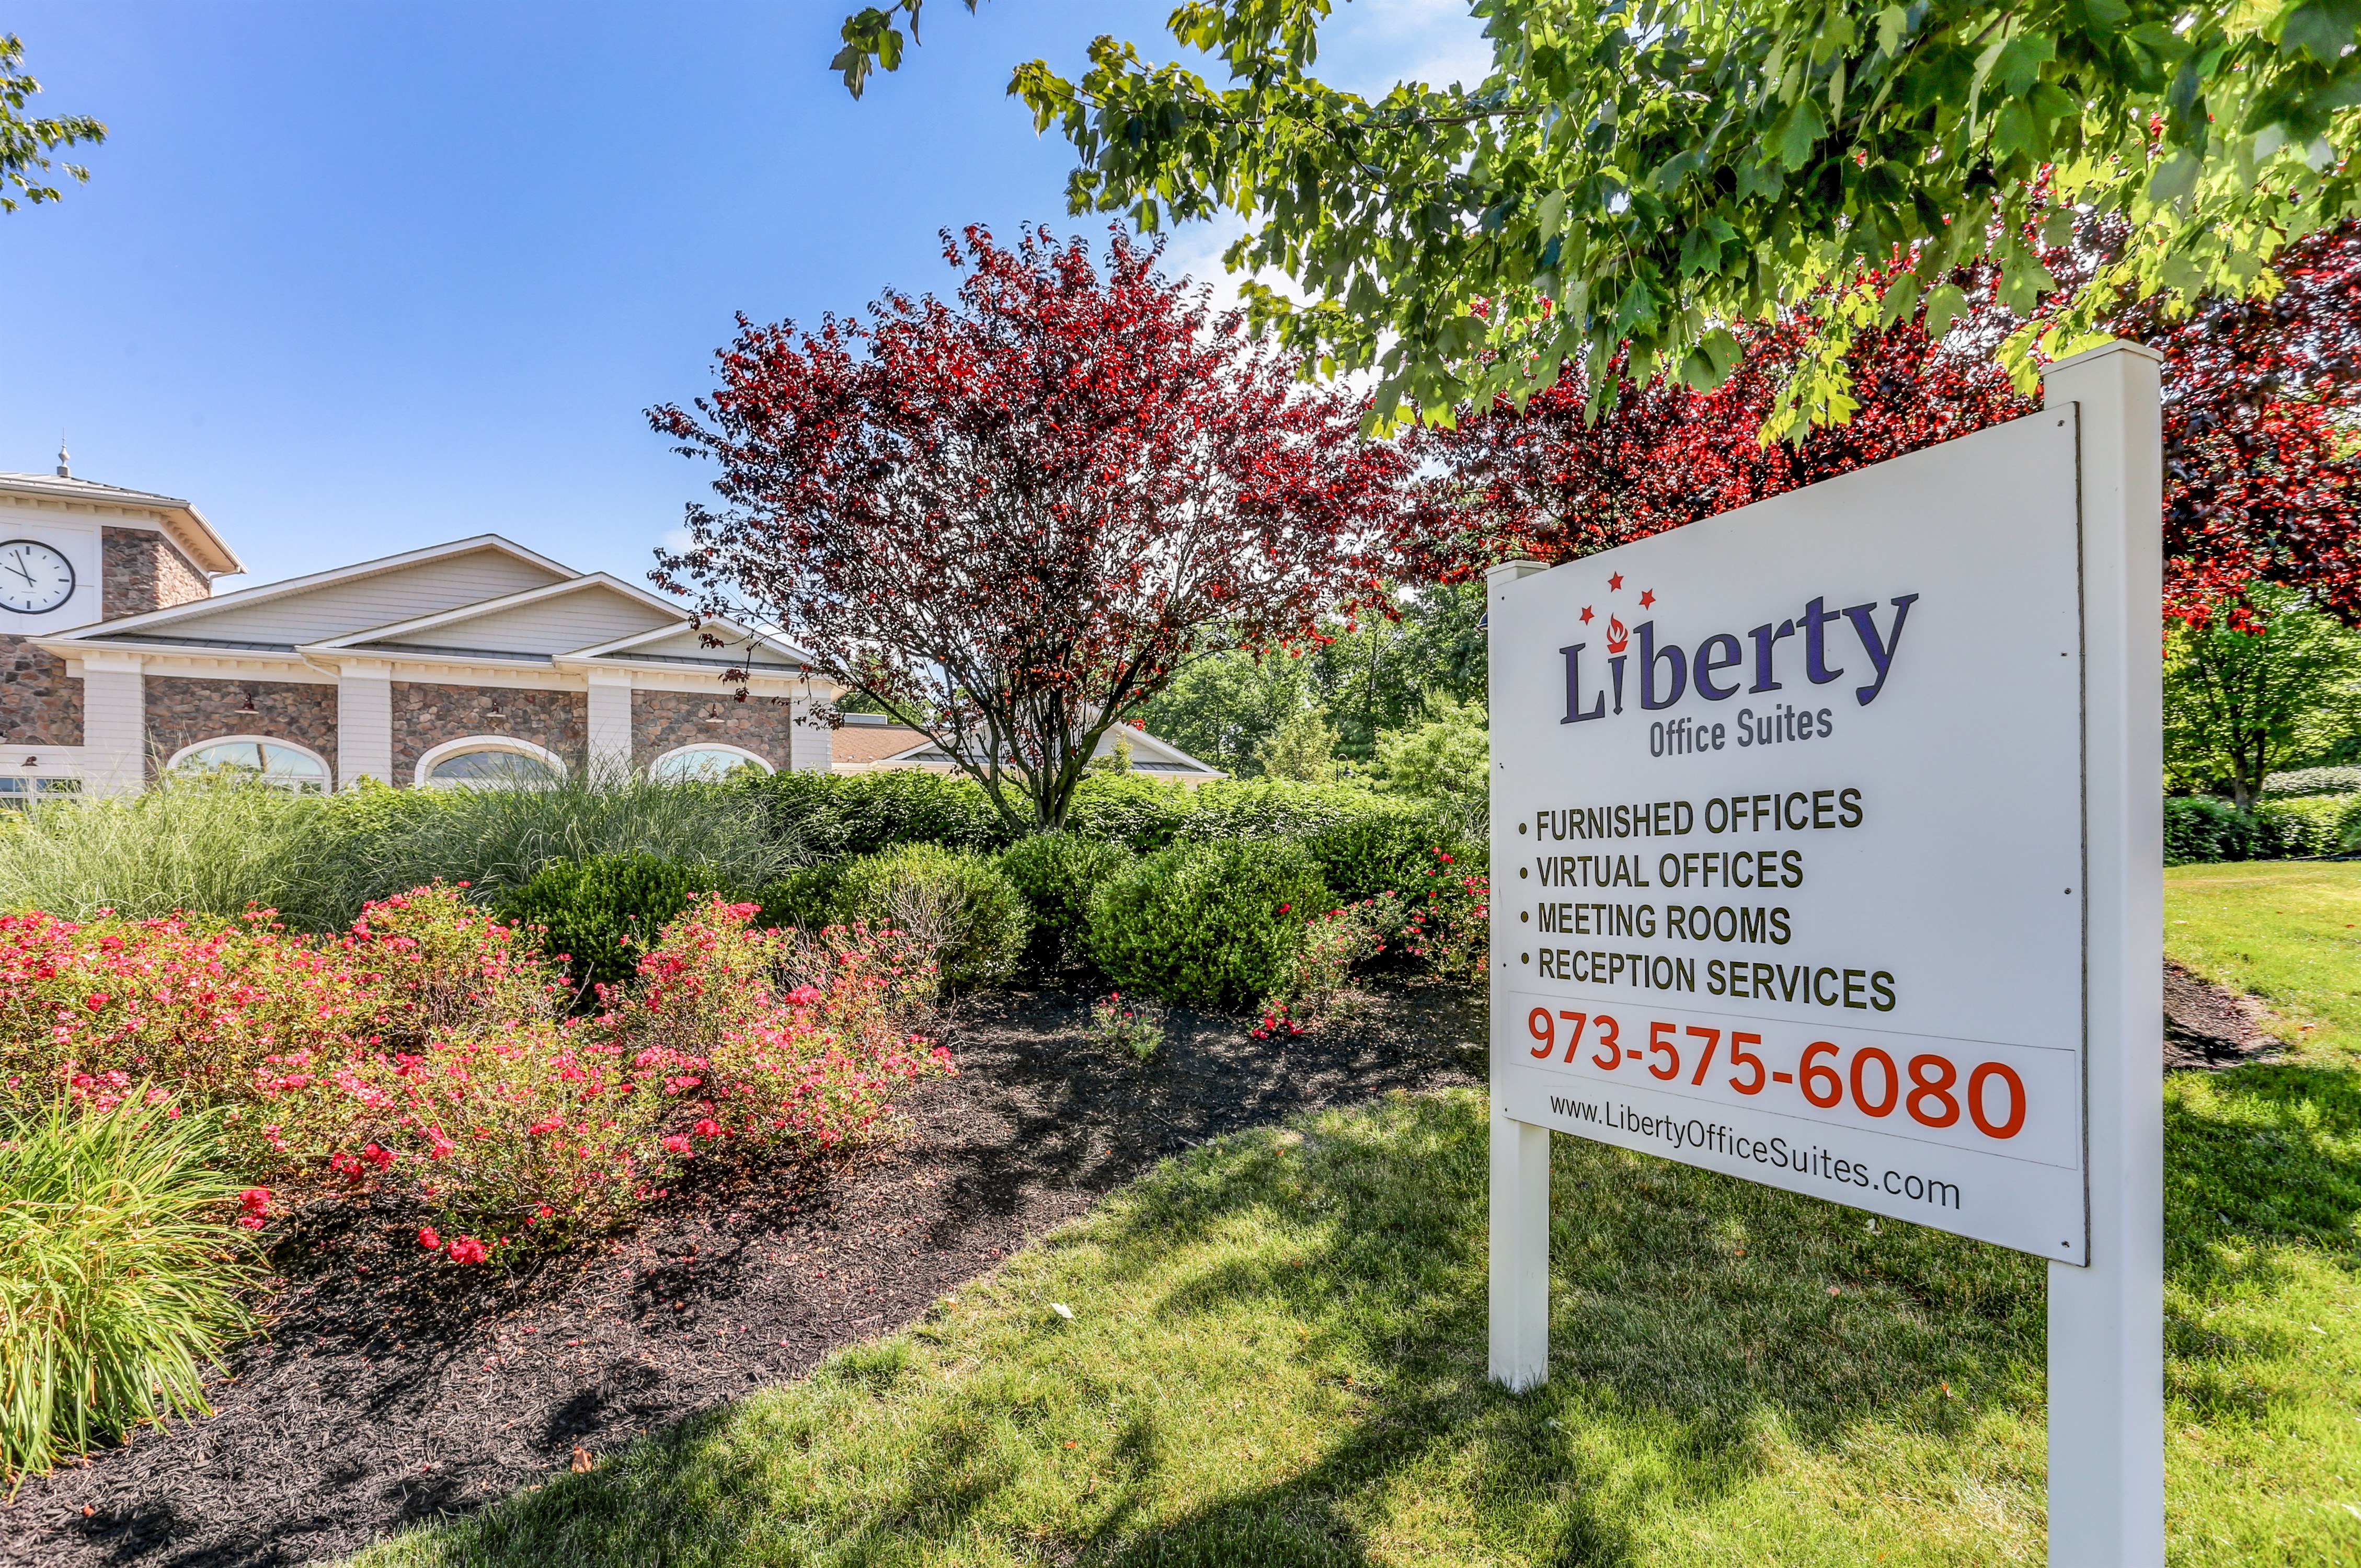 Convenience Redefined: Liberty Office Suites’ Strategic Locations in Montville, NJ and Parsippany, NJ